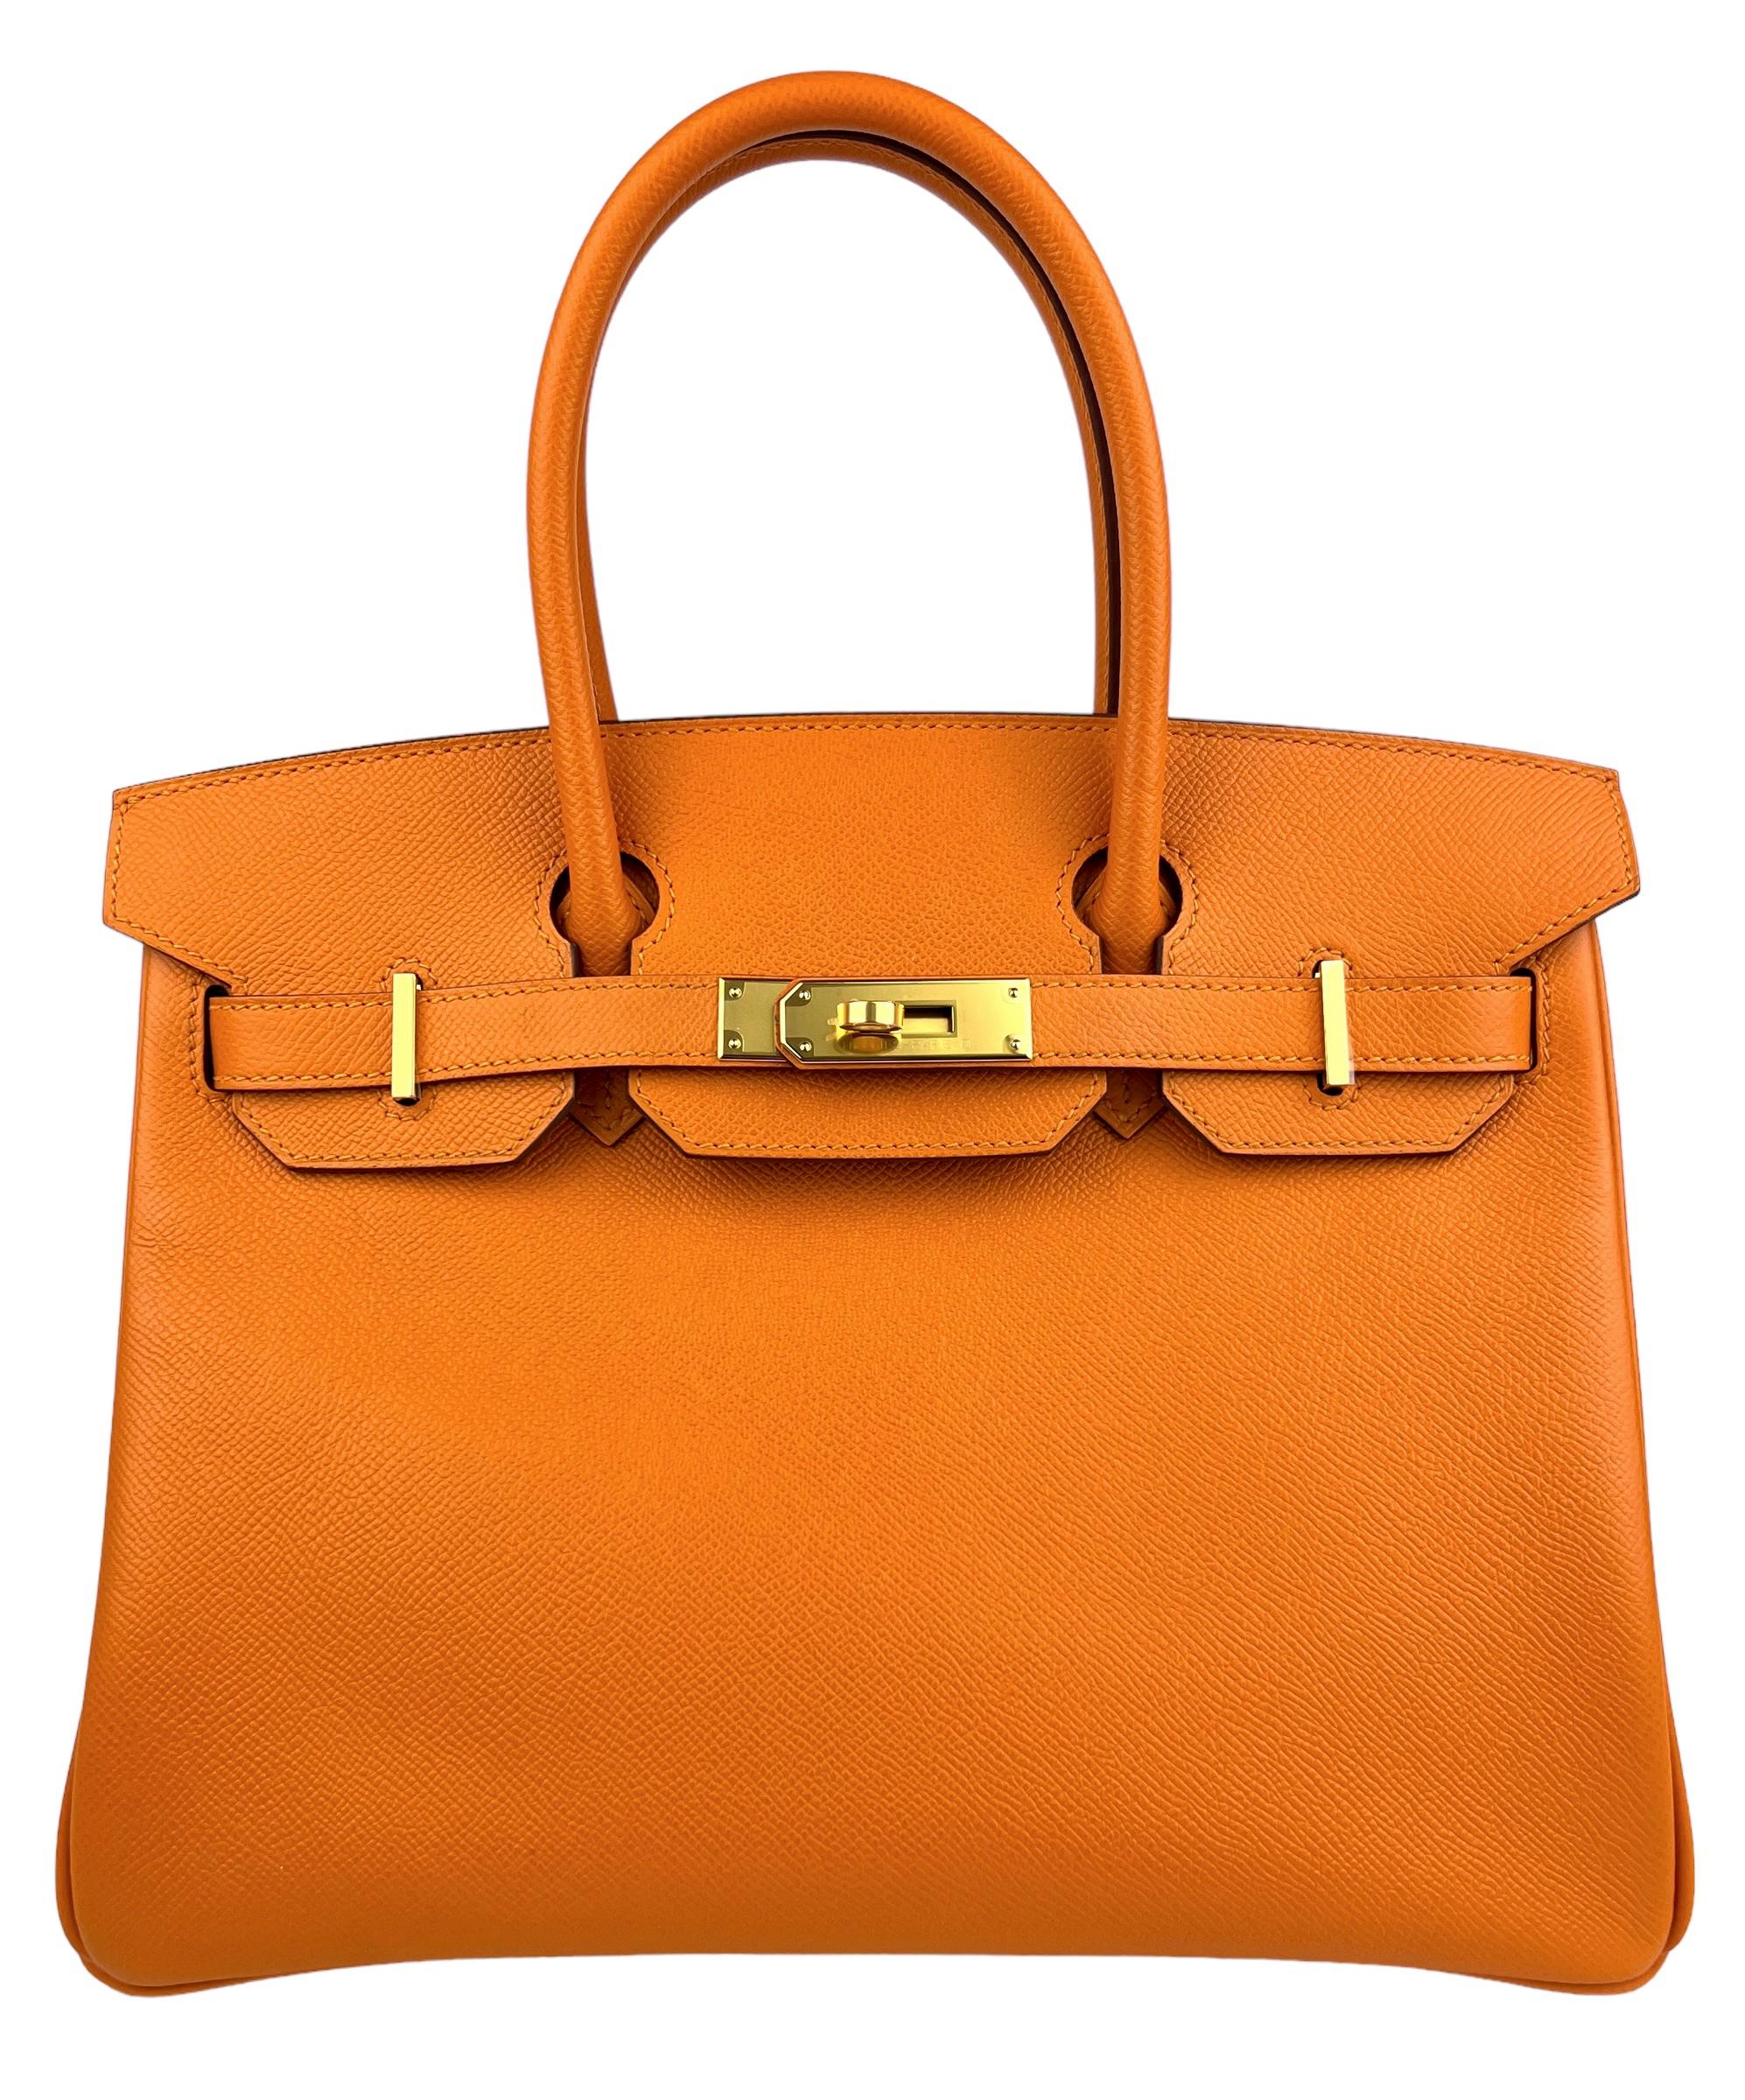 Stunning As New Hermes Birkin 30 Orange Apricot Epsom Leather complimented by Gold Hardware. As New Condition Plastic on all Hardware. 2019 D Stamp.

Shop with confidence from Lux Addicts. Authenticity Guaranteed! 

Lux Addicts is a Premier Luxury